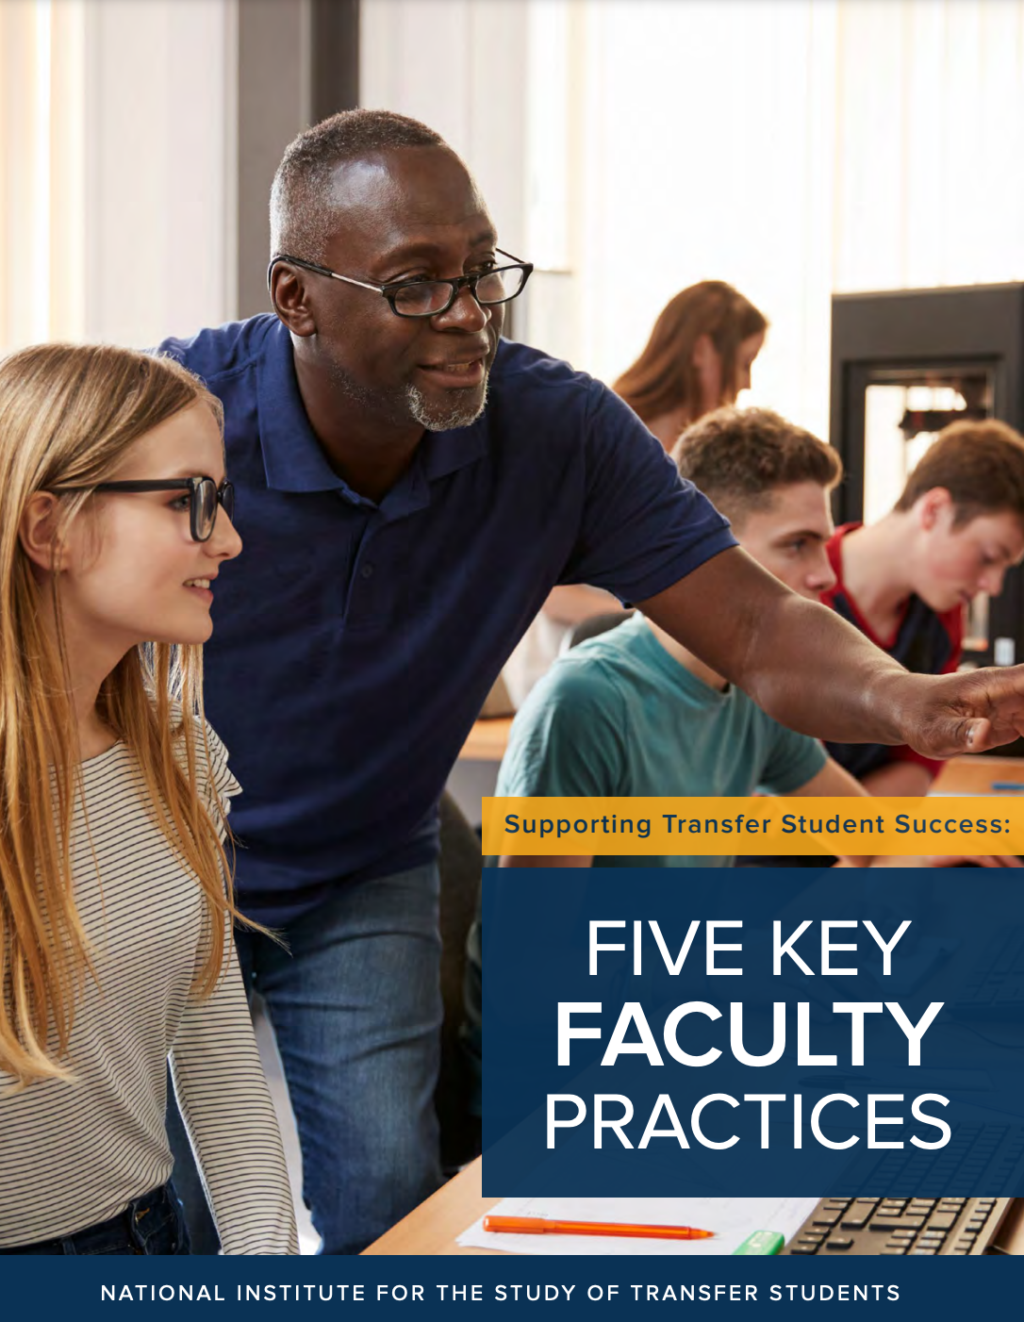 Cover of report titled "Supporting Transfer Student Success: Five Key Faculty Practices" 